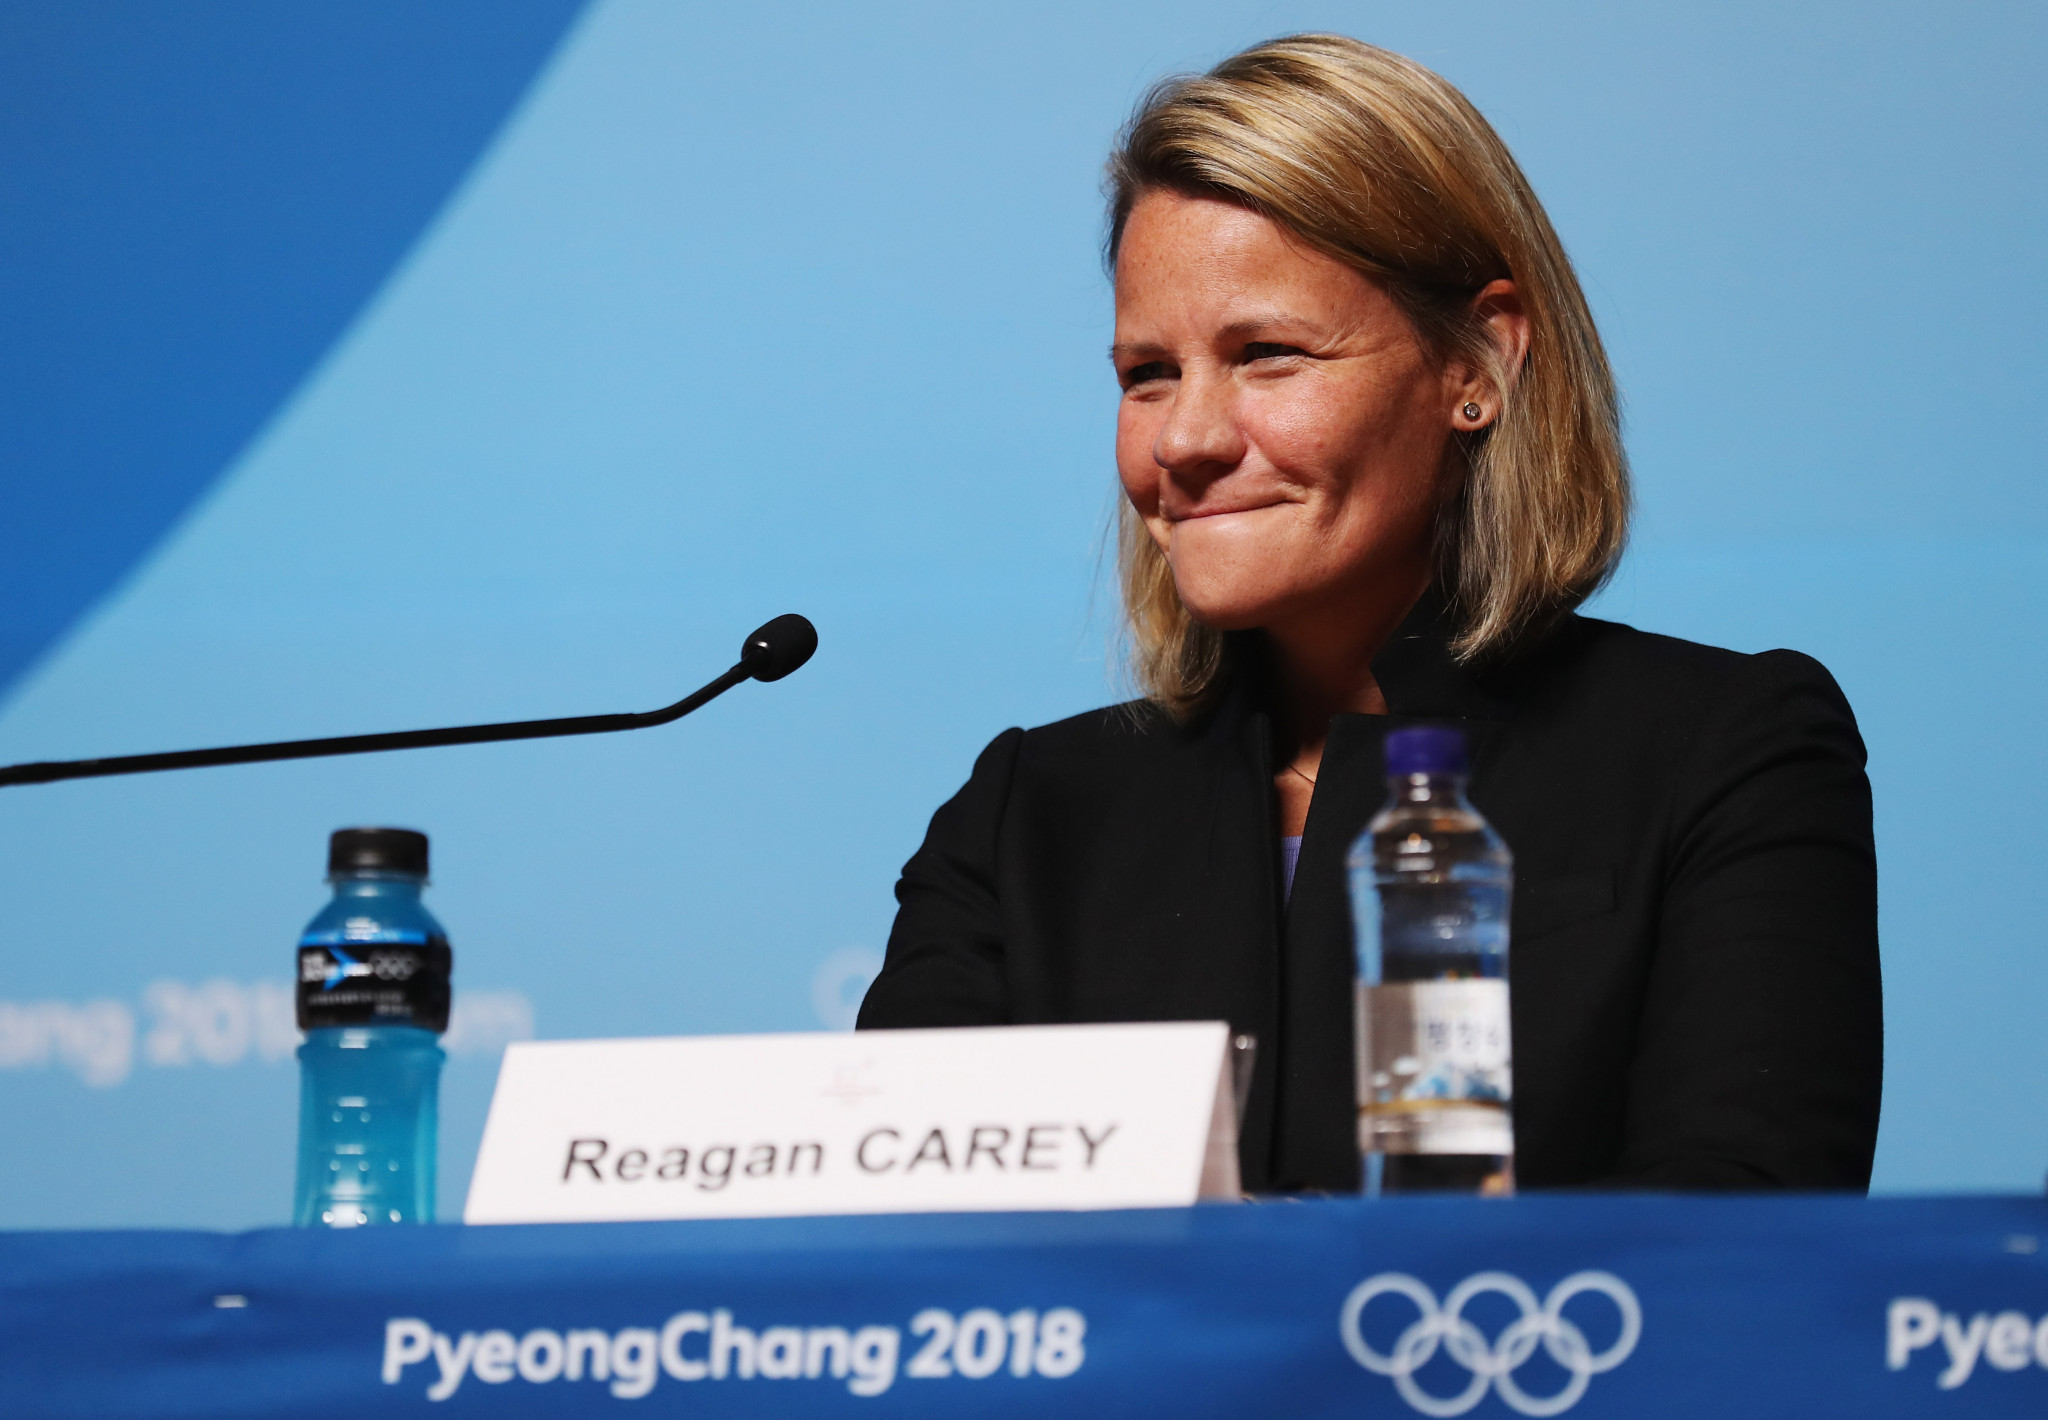 Reagan Carey has been named as the new Premier Hockey Federation league commissioner ©Getty Images